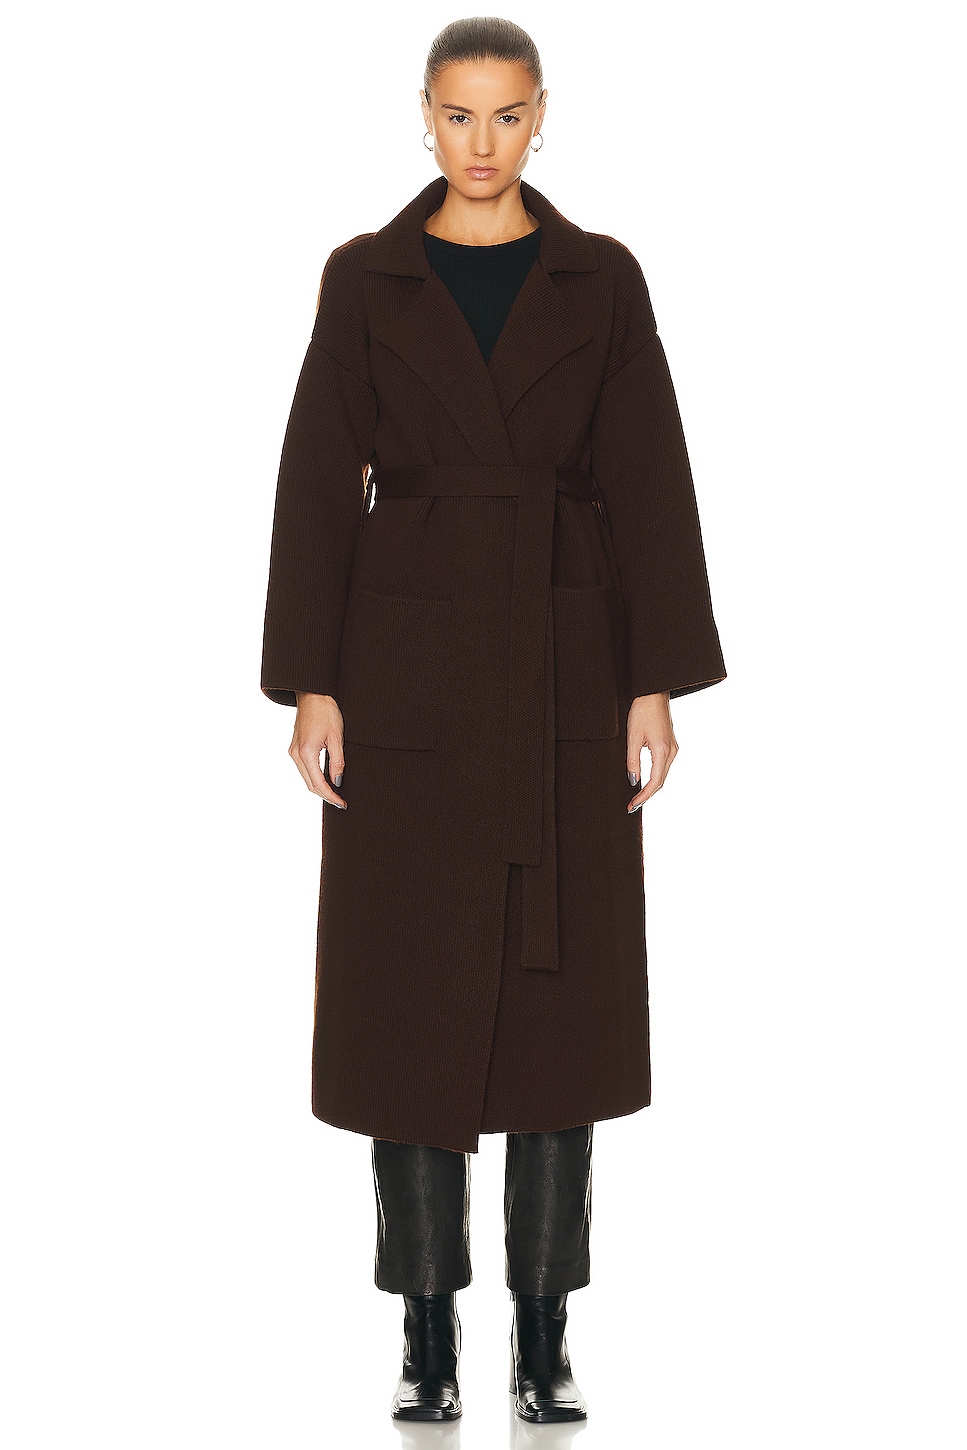 Claire Extra Long Belted Knit Cardigan in Brown